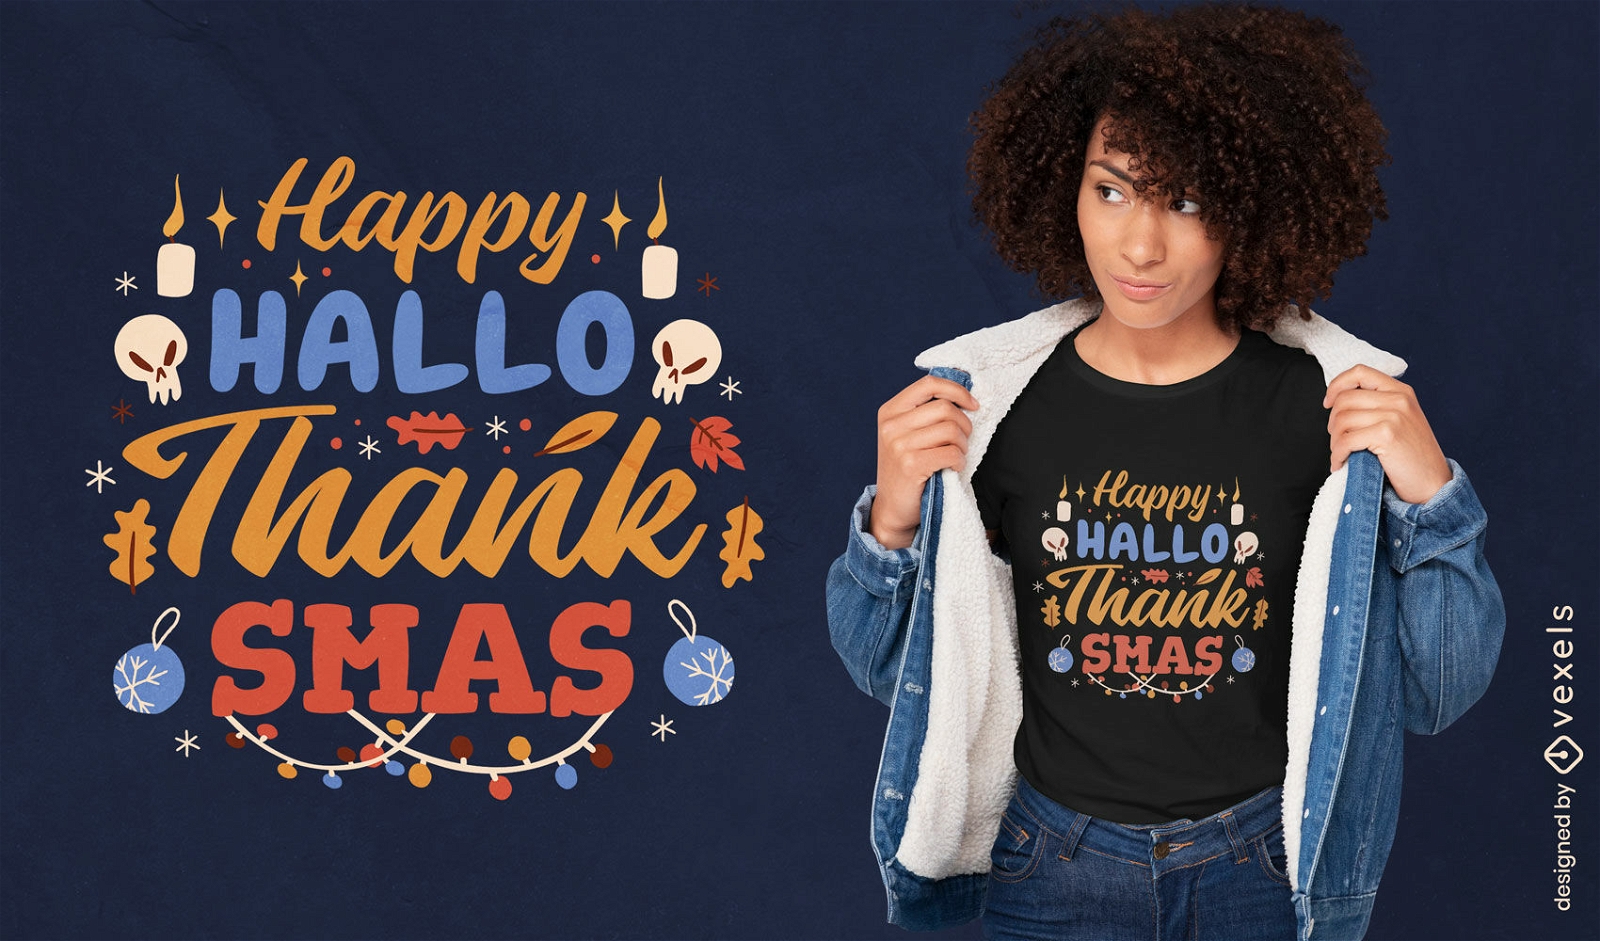 Halloween Thanksgiving Christmas funny holiday lettering t-shirt design